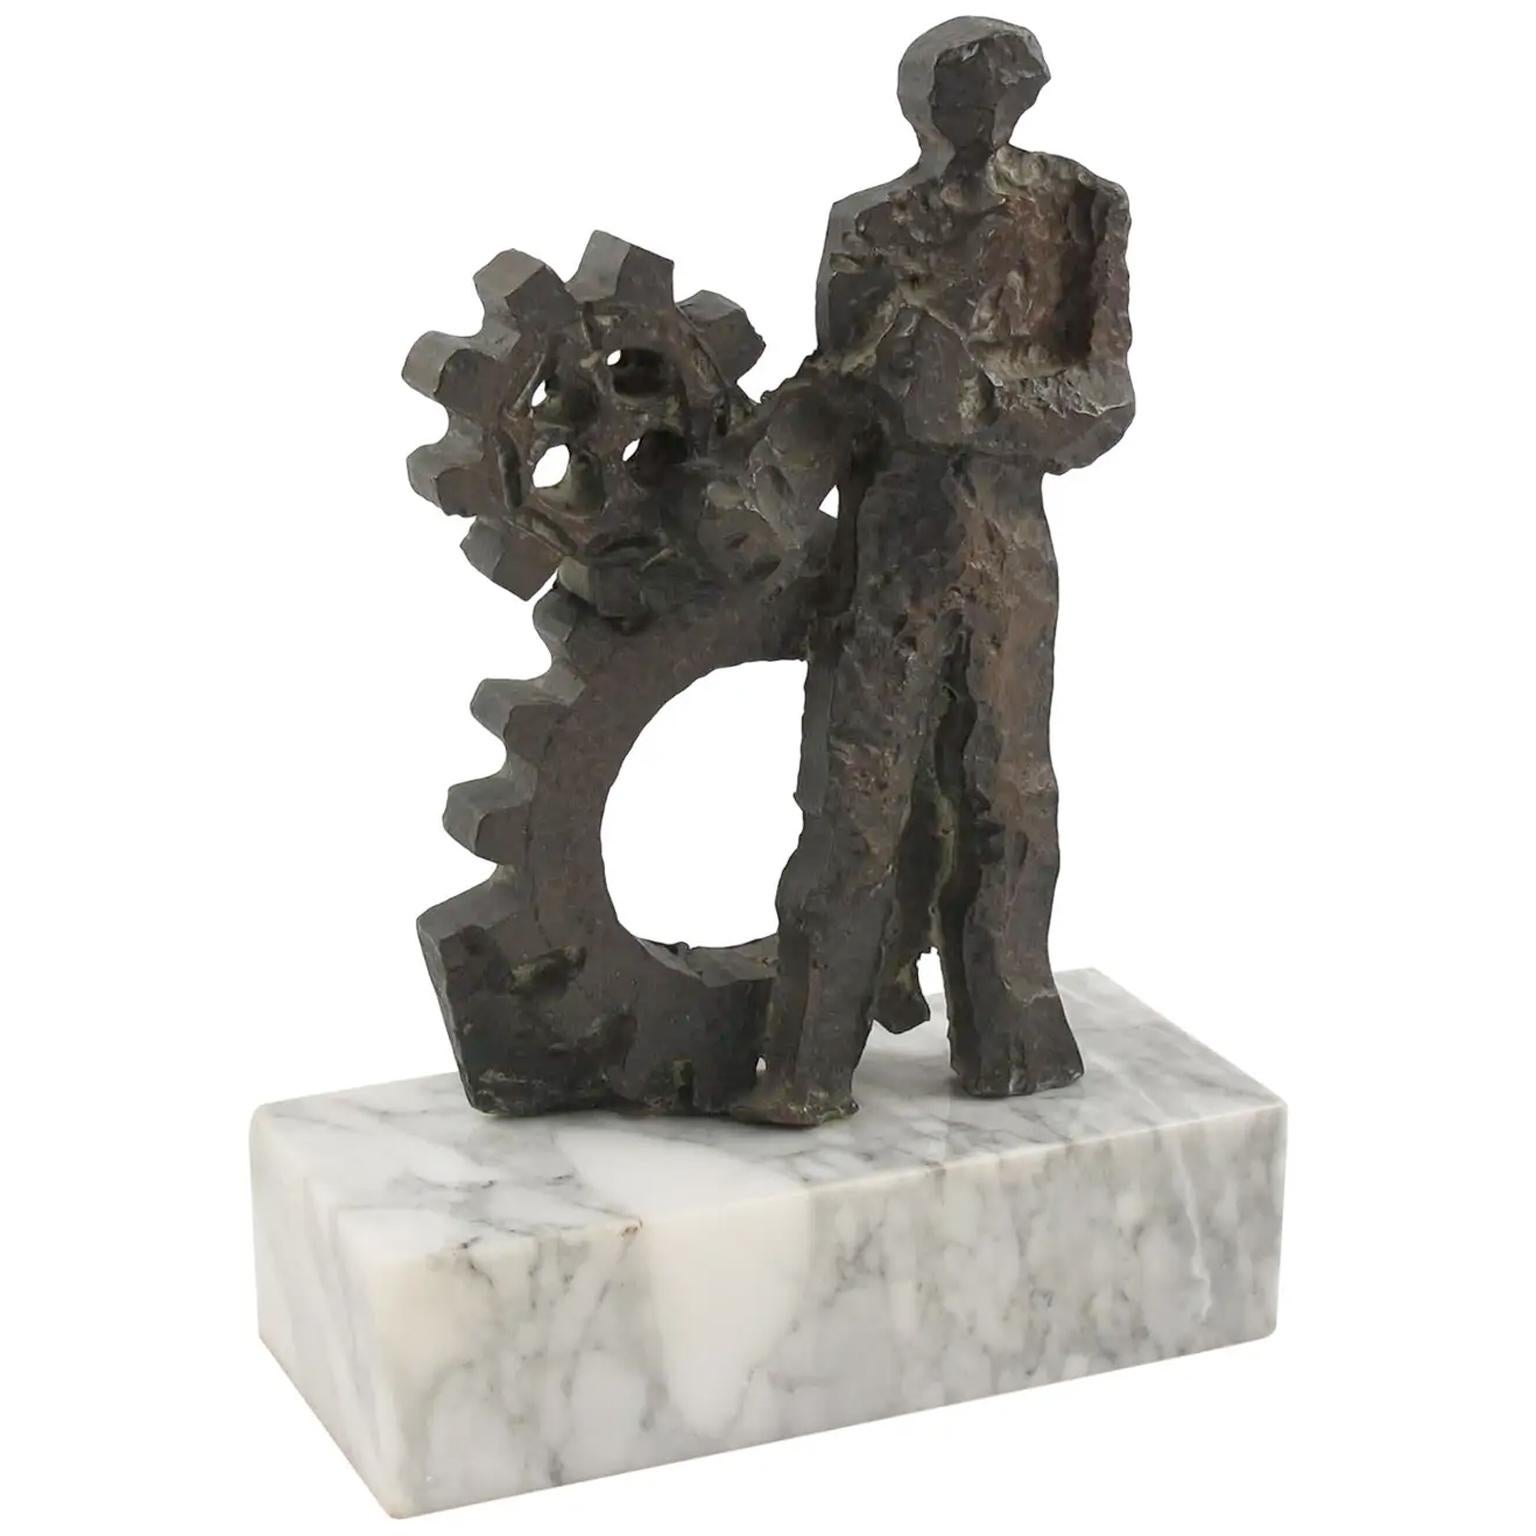 This stunning modern brutalist bronze sculpture from the 1970s depicts an allegory of man and machine (or worker) with a beautiful original dark green patina. The design holds the attention from every angle, and the shape is intentionally raw and